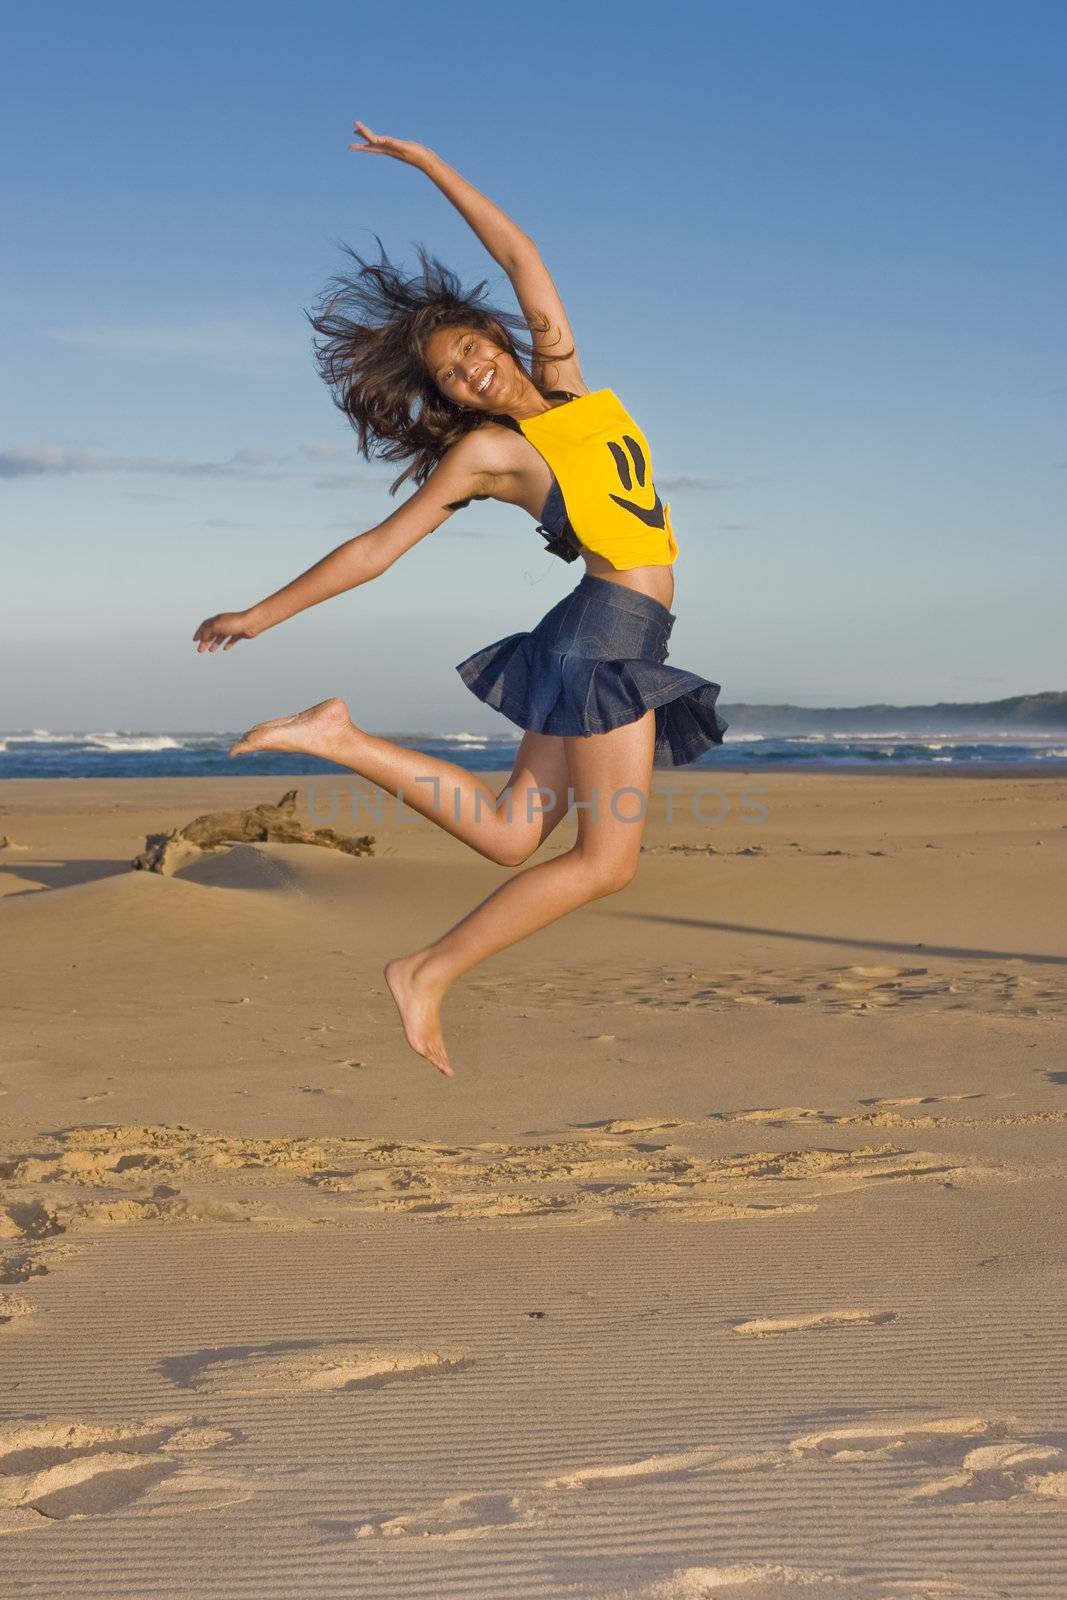 Girl with smily face top on jumping in the air